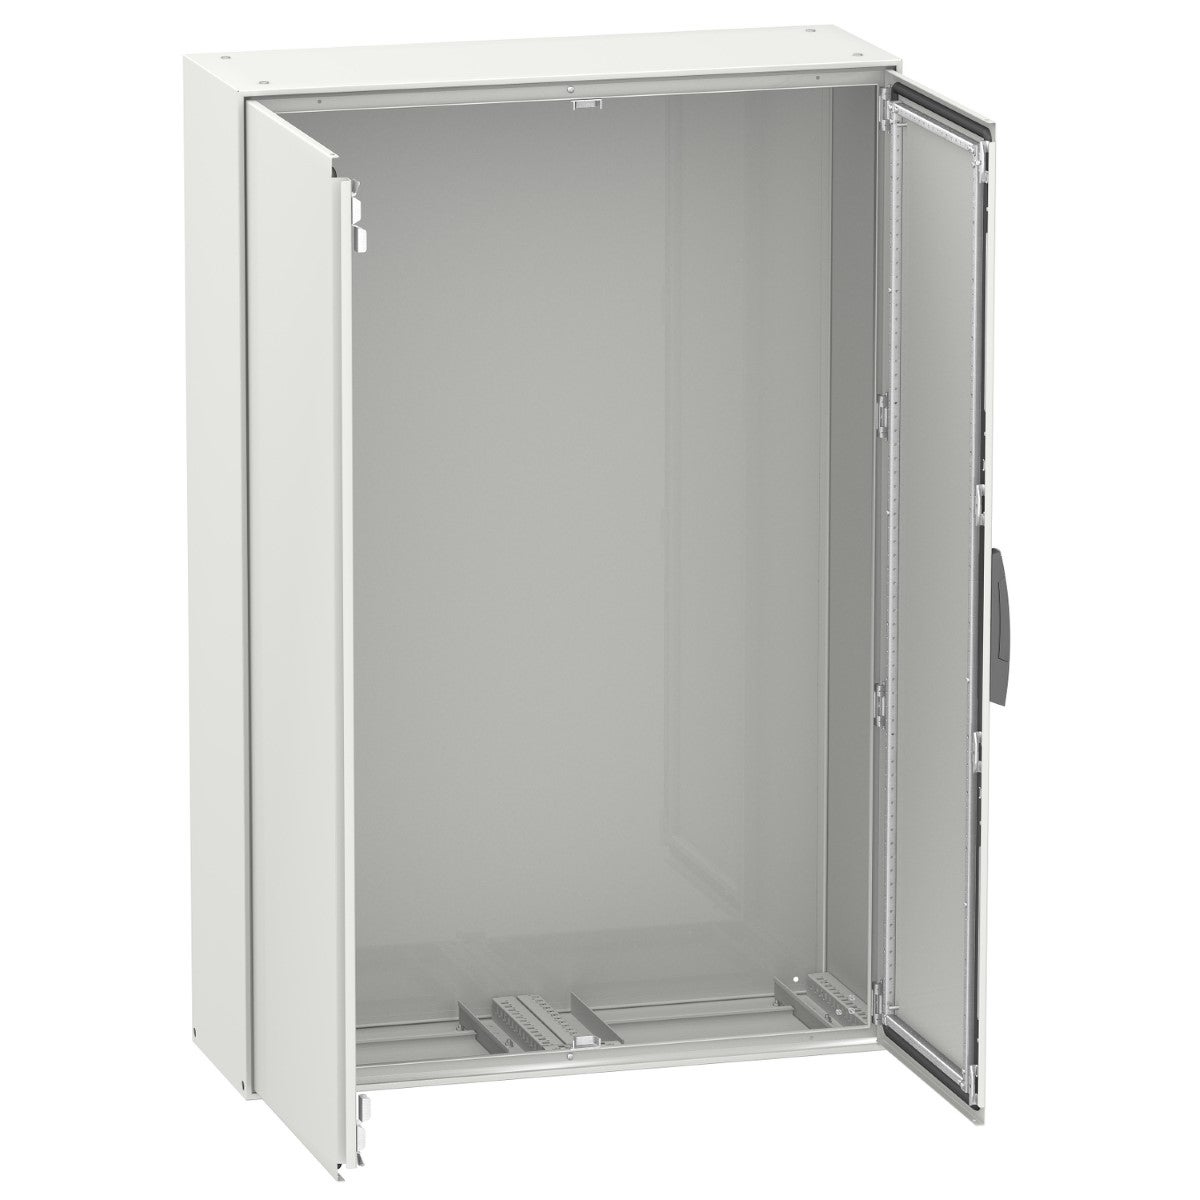 Spacial SM compact enclosure without mounting plate - 2000x1200x500 mm